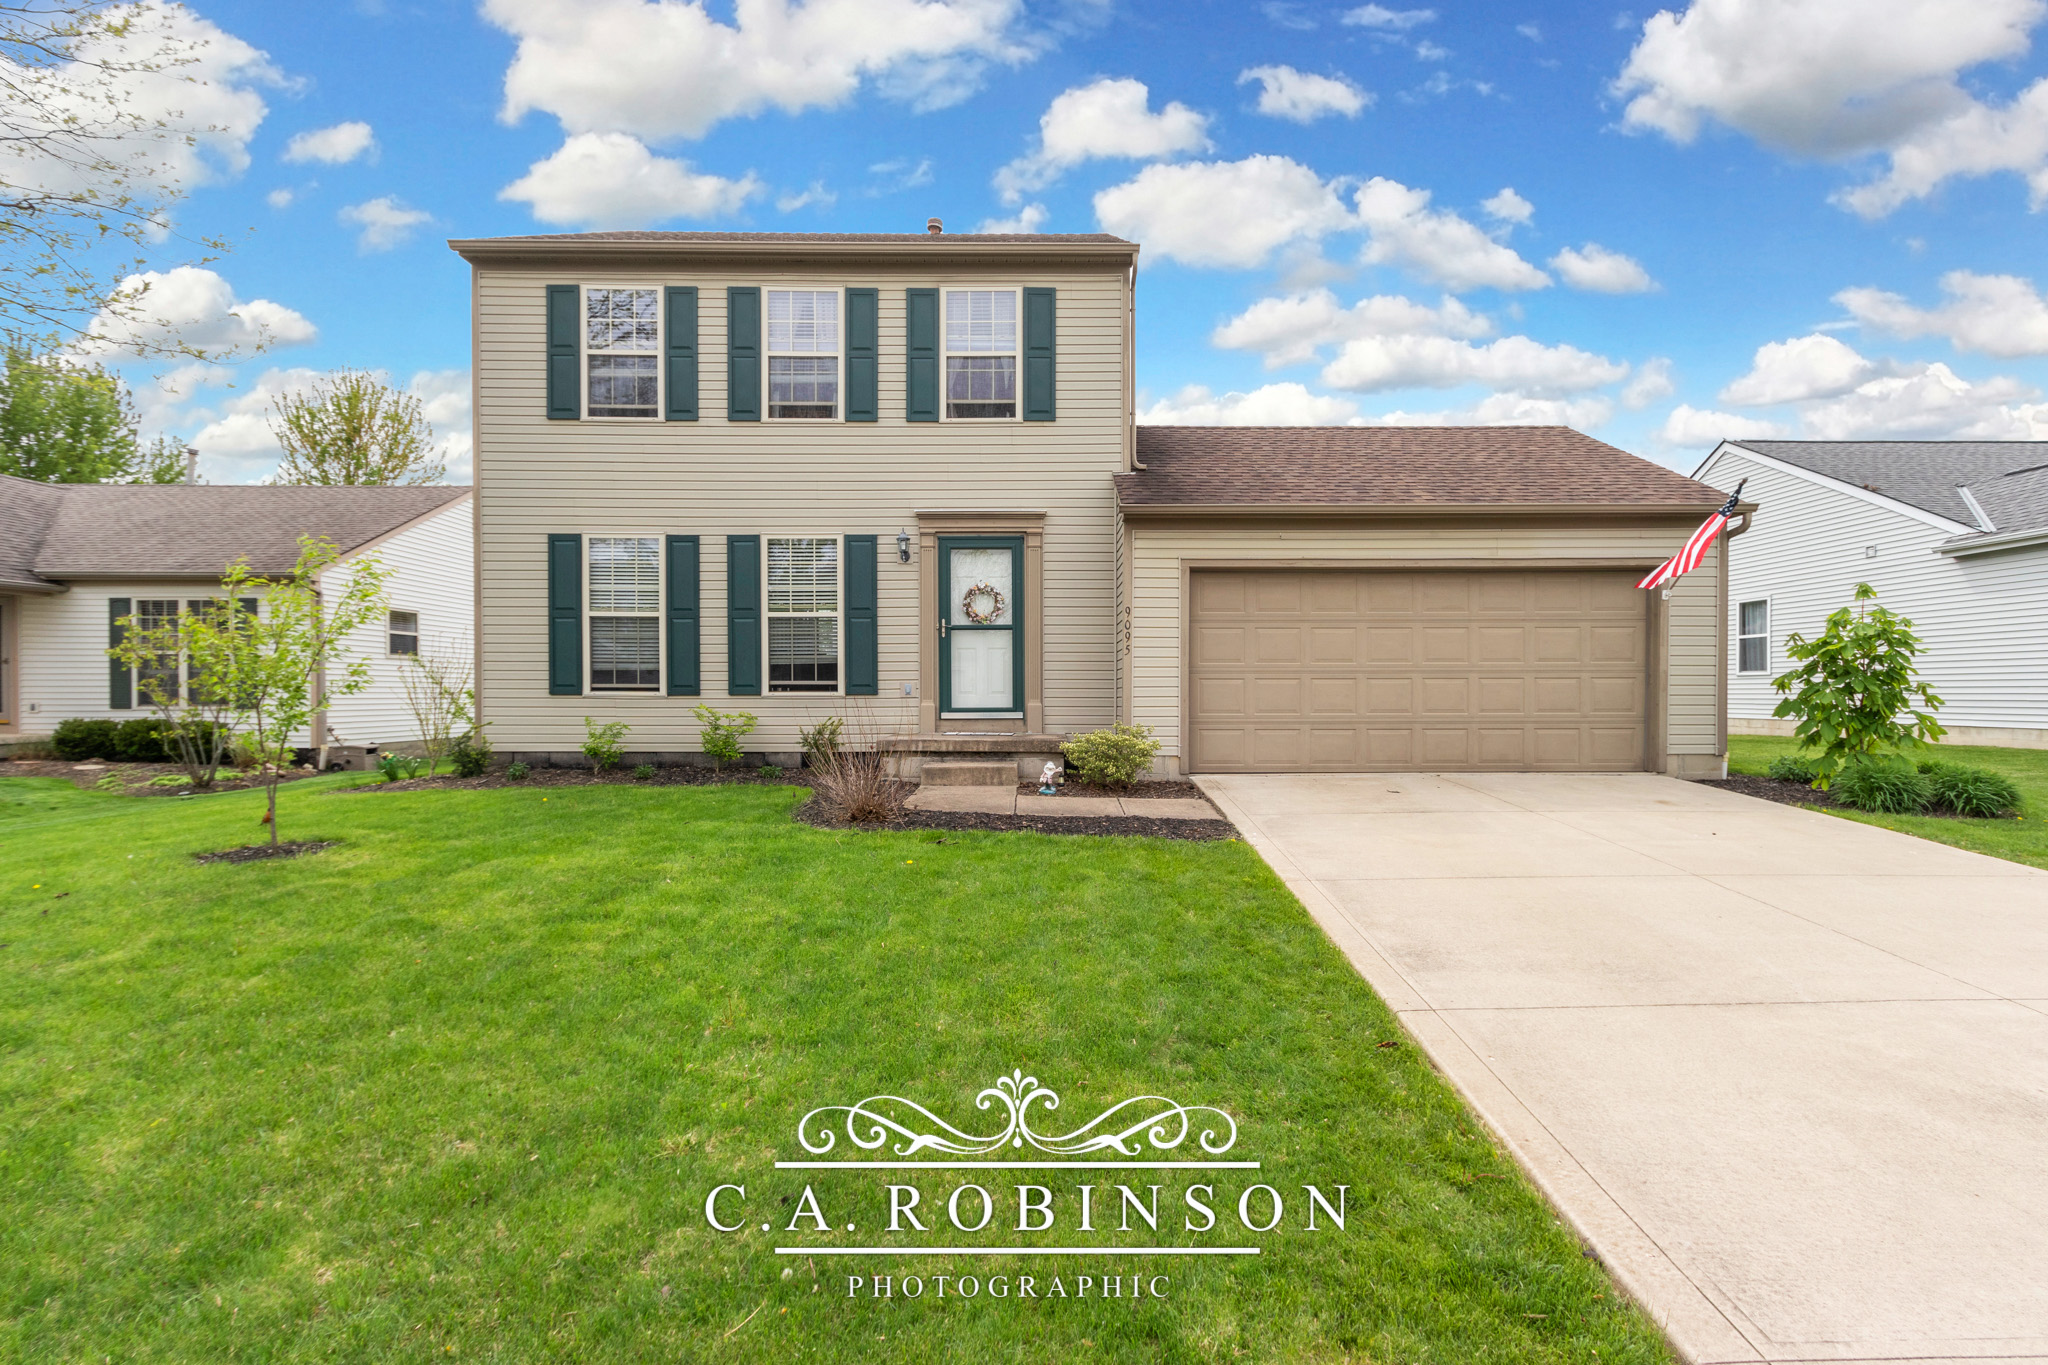 SOLD! 9095 Holquest Dr, Lewis Center, OH 43035